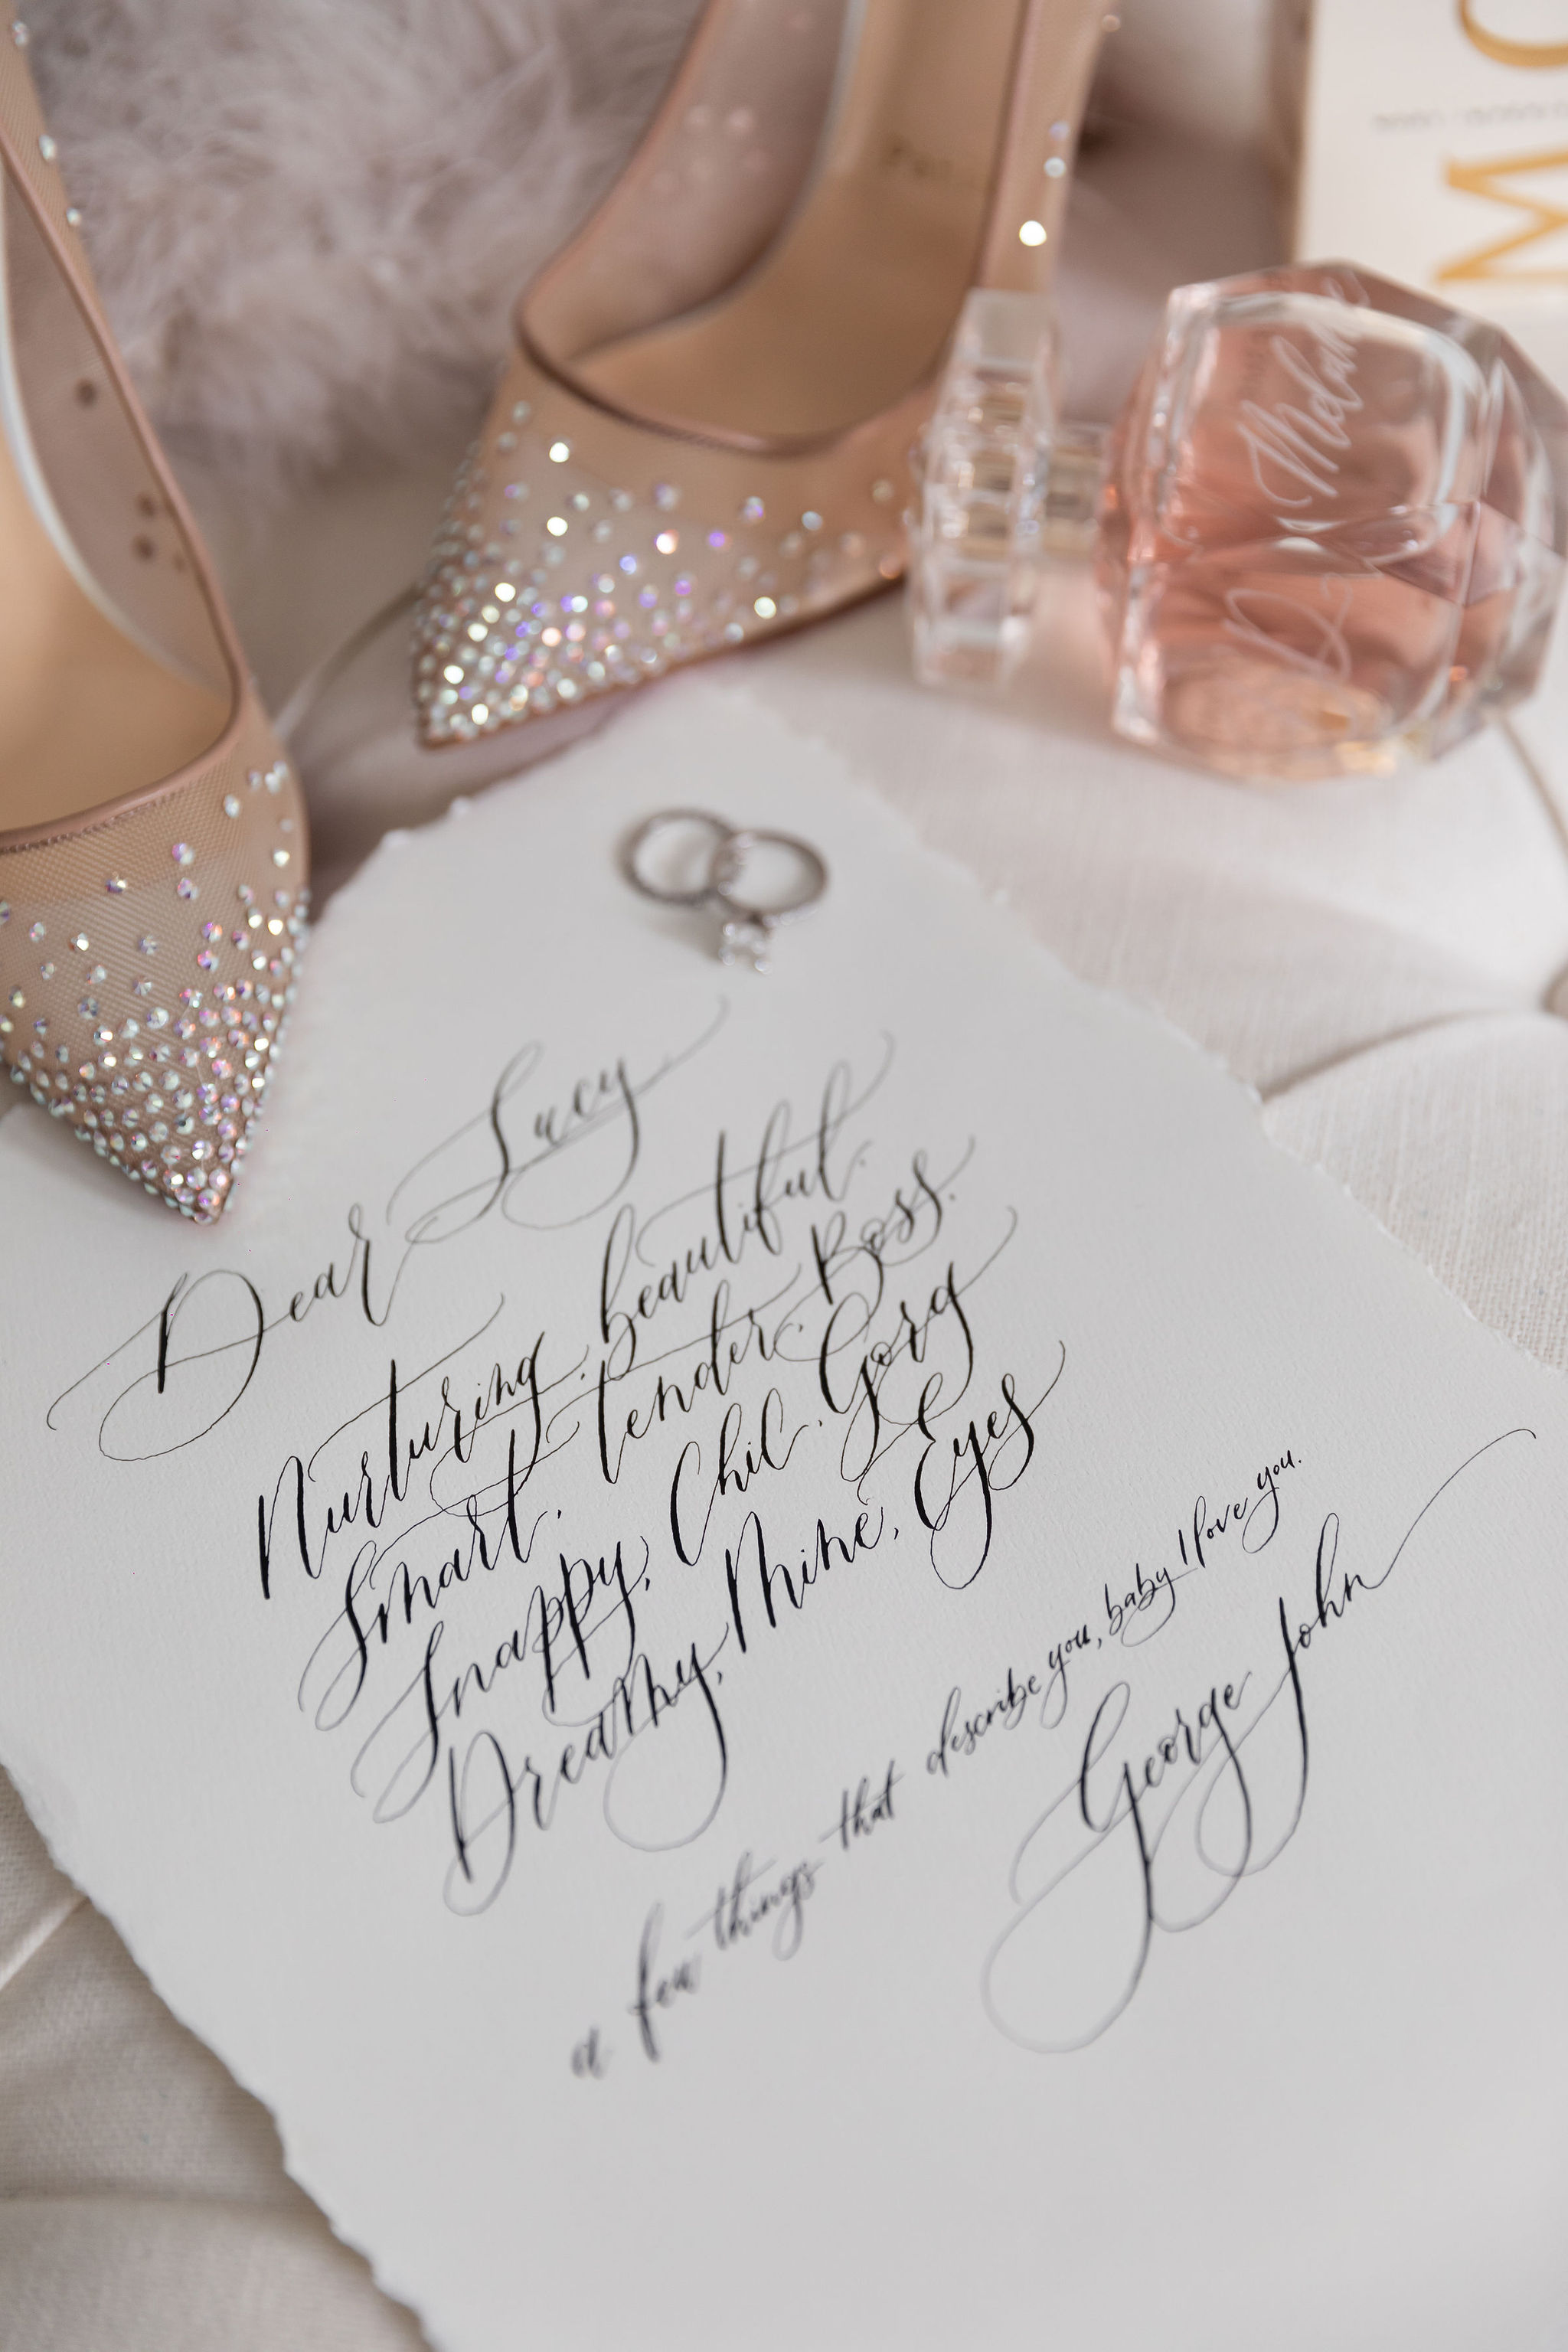 Calligraphy wedding vows to capture the love of your wedding day